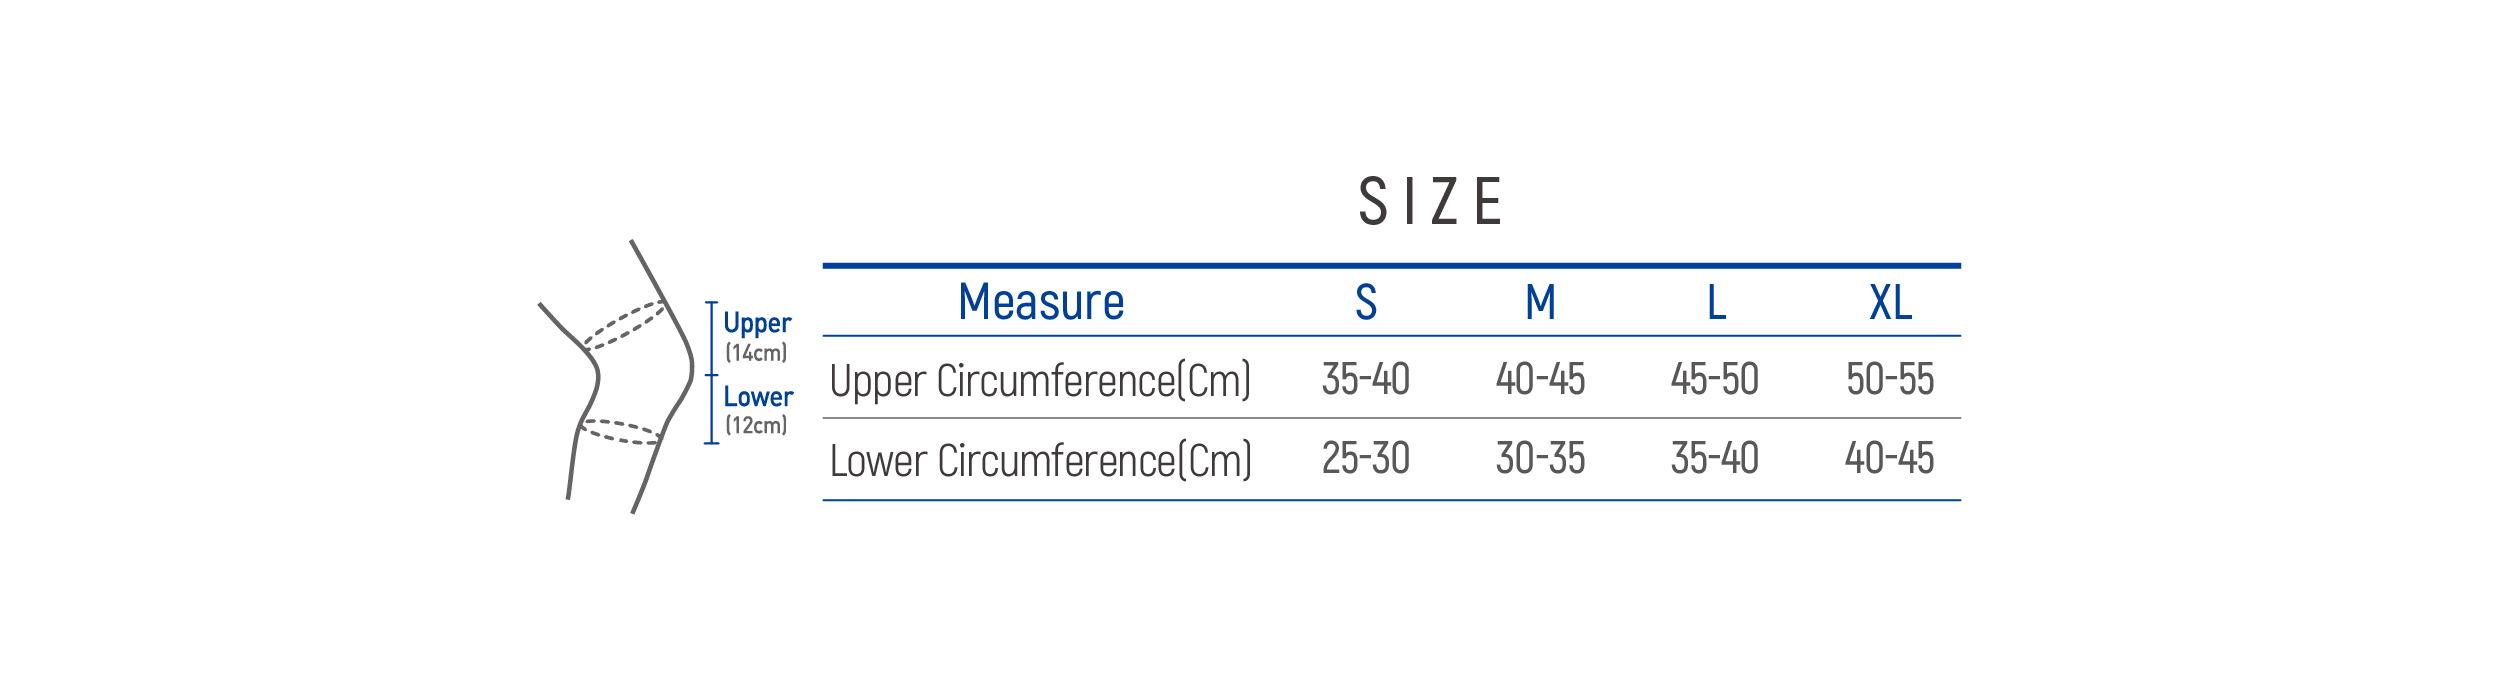 DR-K053 Size table image